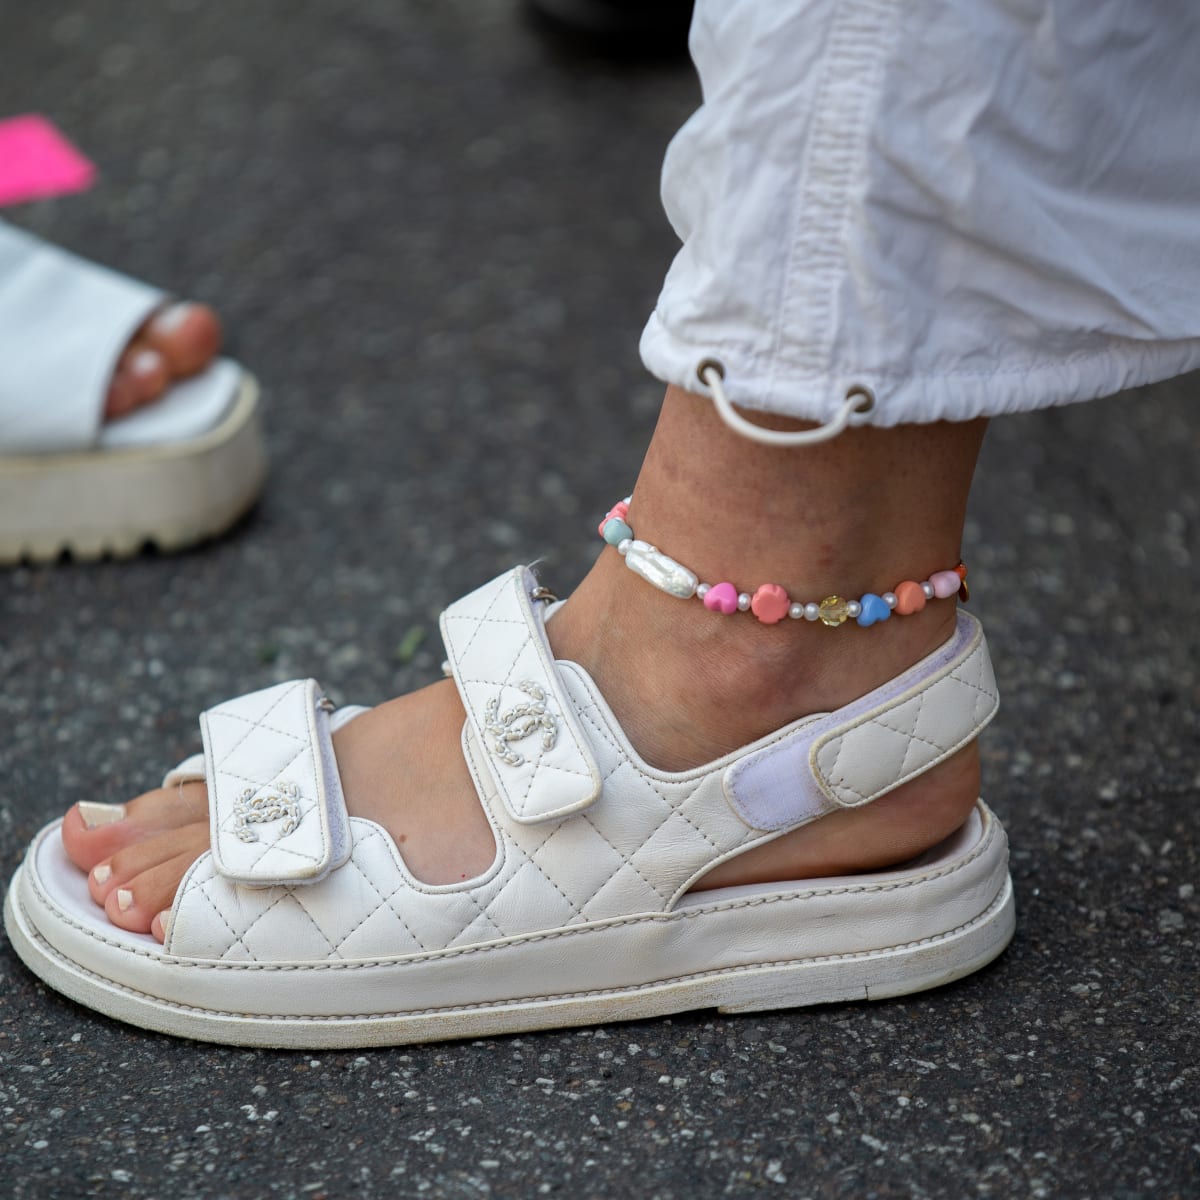 The Best Anklets to Shop for This Summer (and How to Style It)